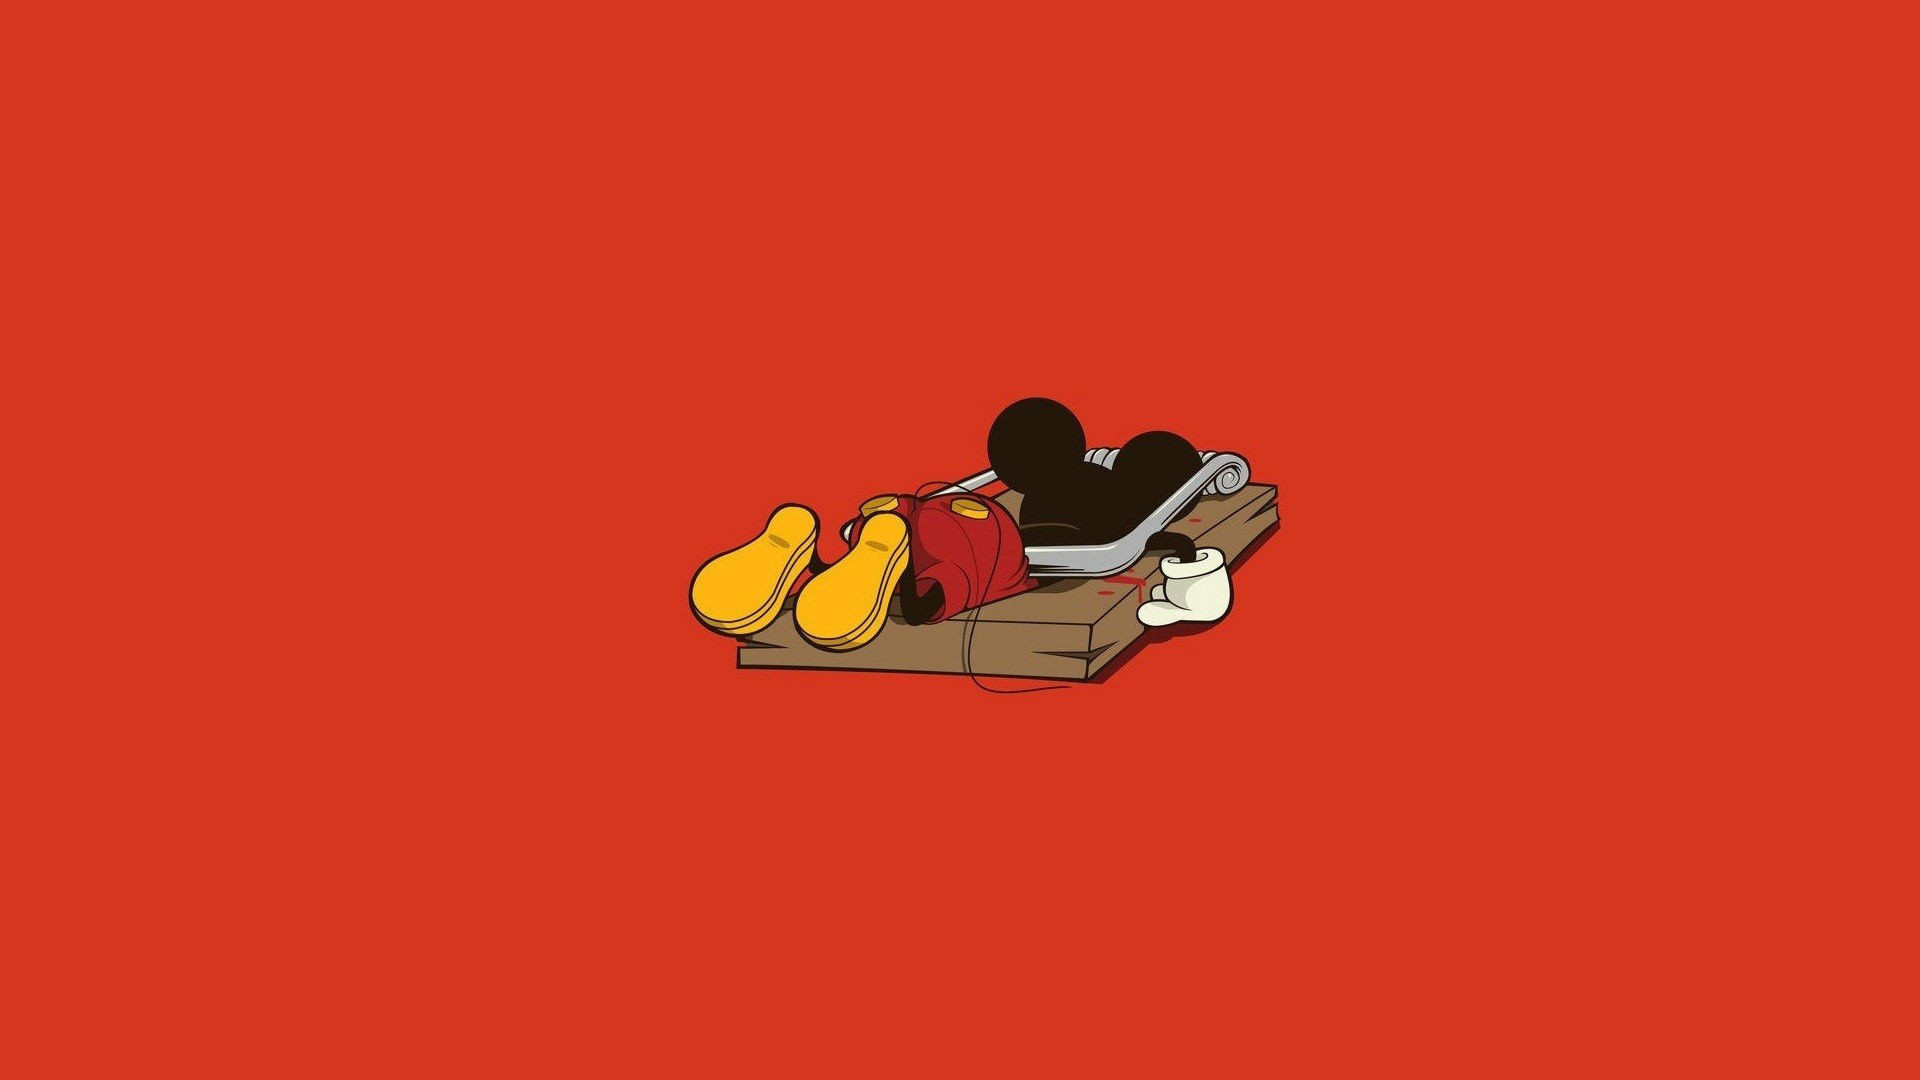 1920x1080 ... Incredible 100% Quality HD Wallpaper#39s Collection Mickey Mouse .